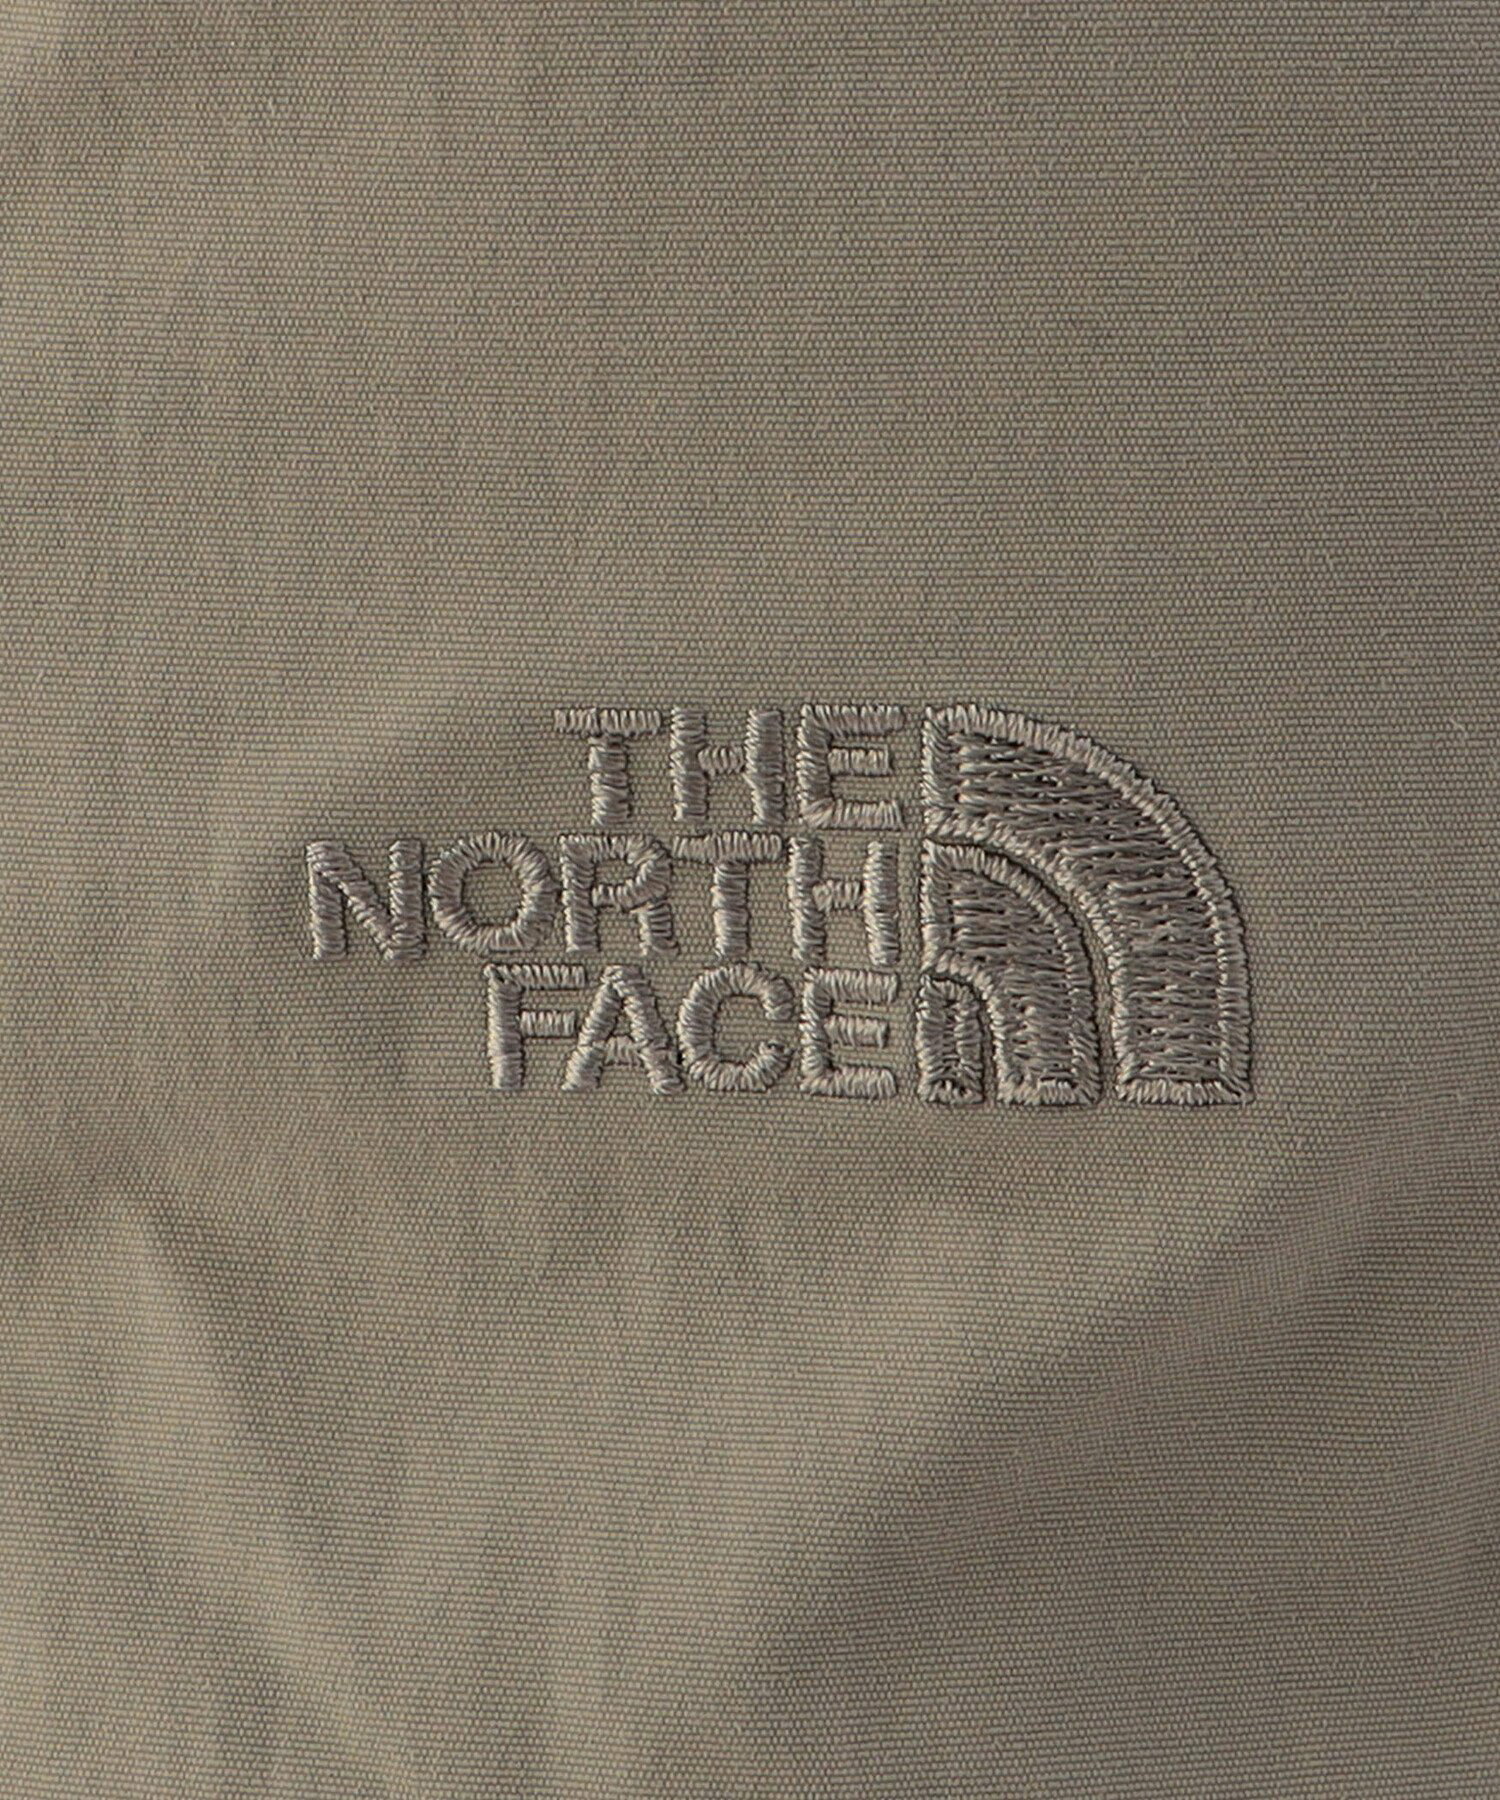 THE NORTH FACE | Enride Hat